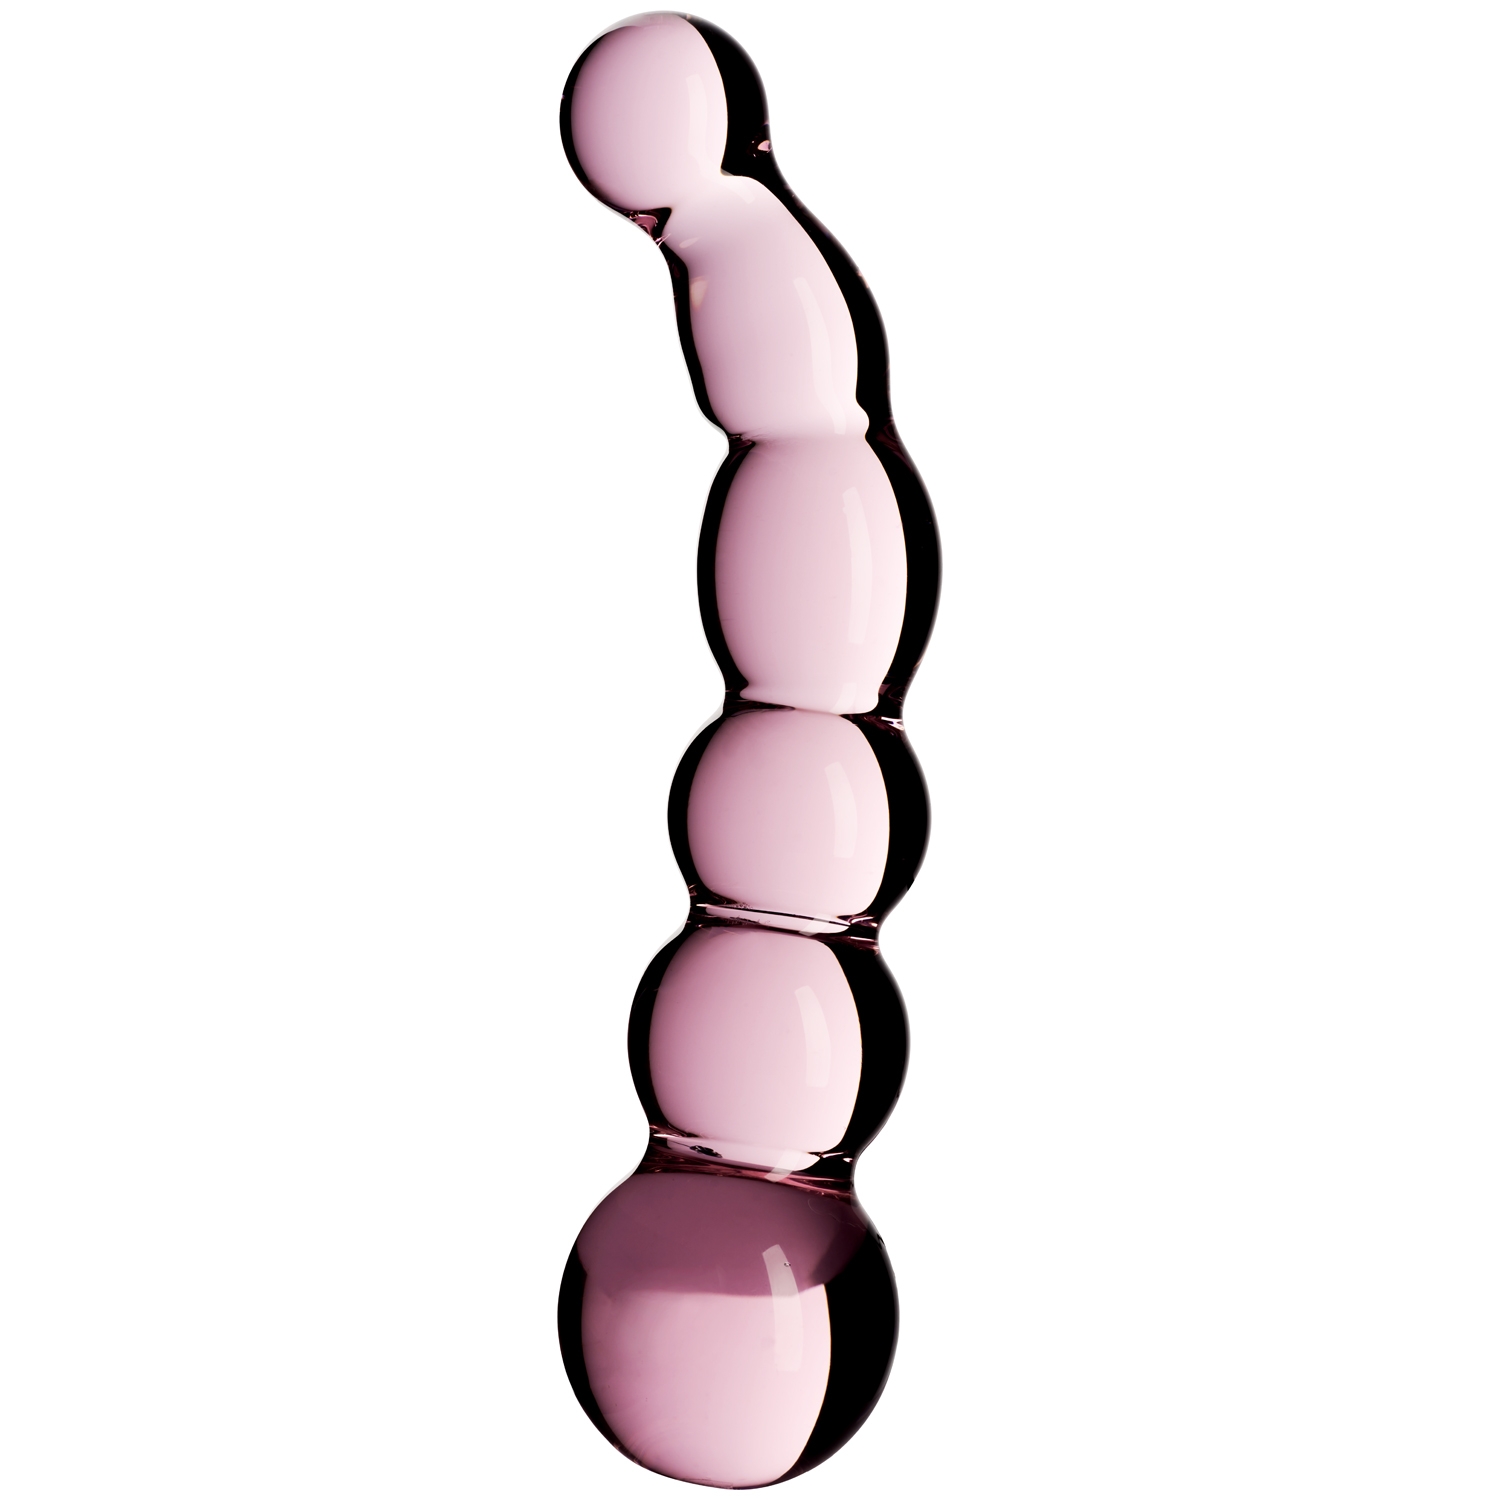 Sinful Rose Groove Glas Dildo 17,5 cm - Pink